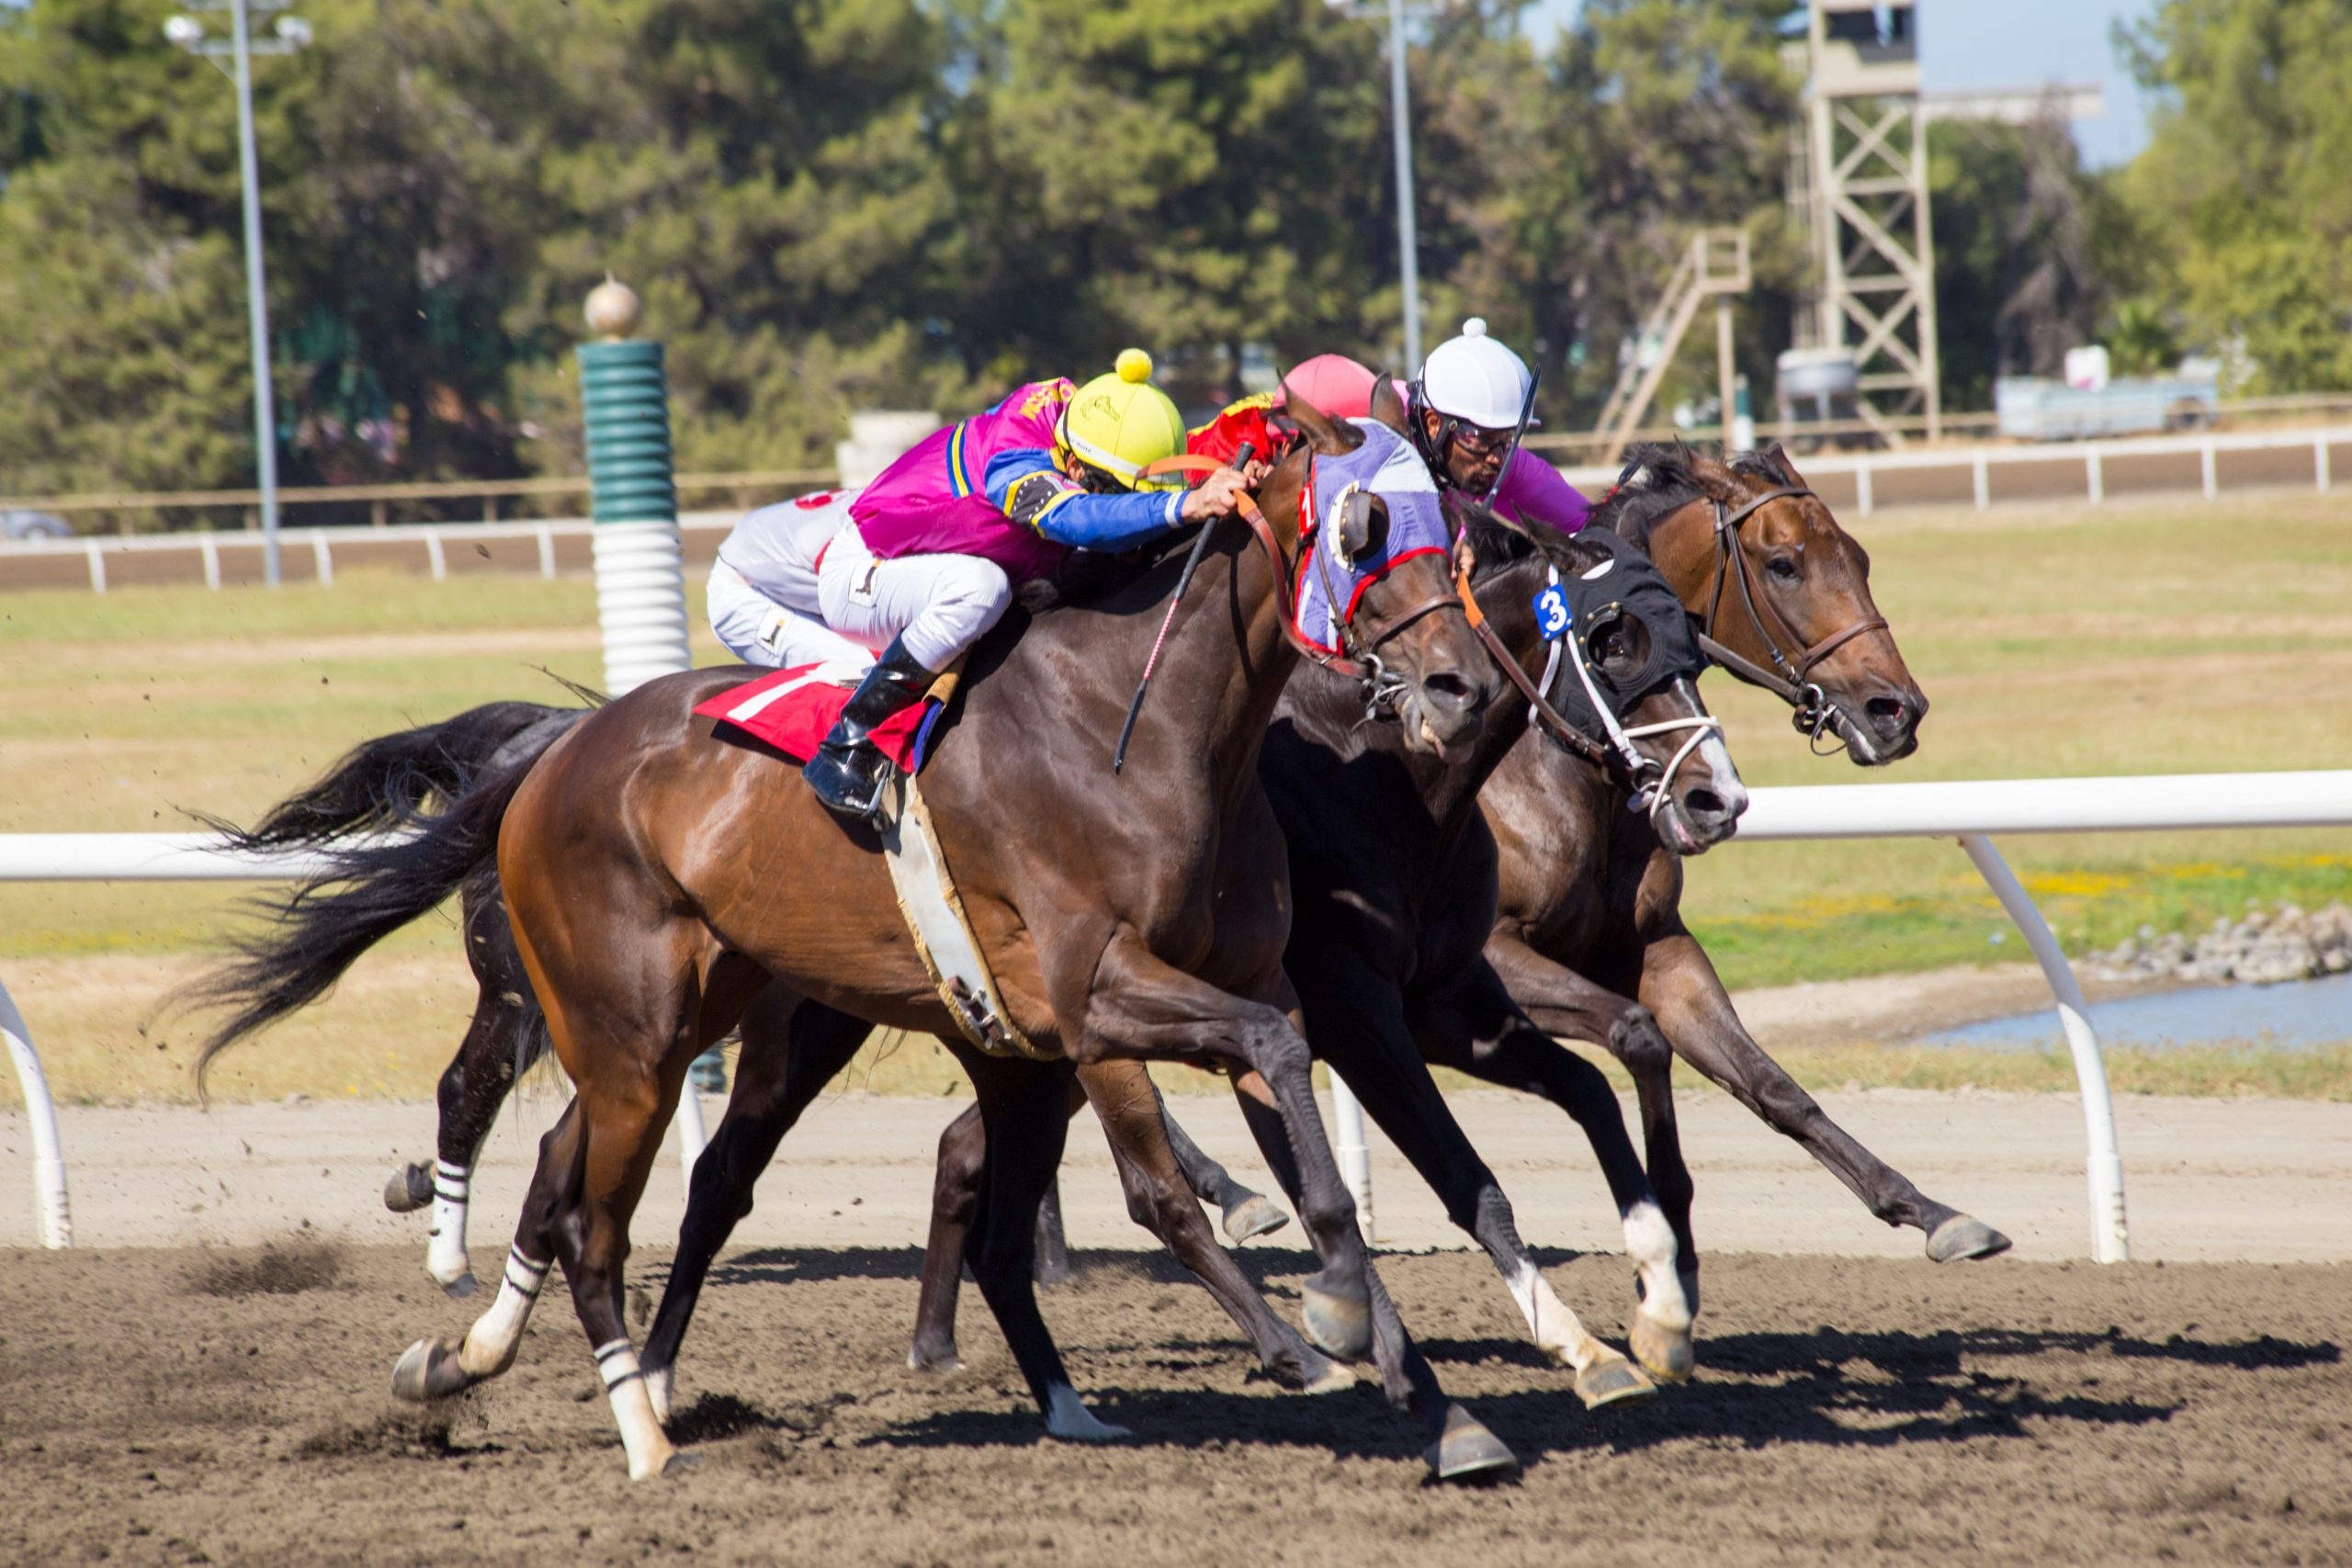 Thoroughbred horse racing, Cal Expo races, State fair event, Track excitement, 2560x1710 HD Desktop